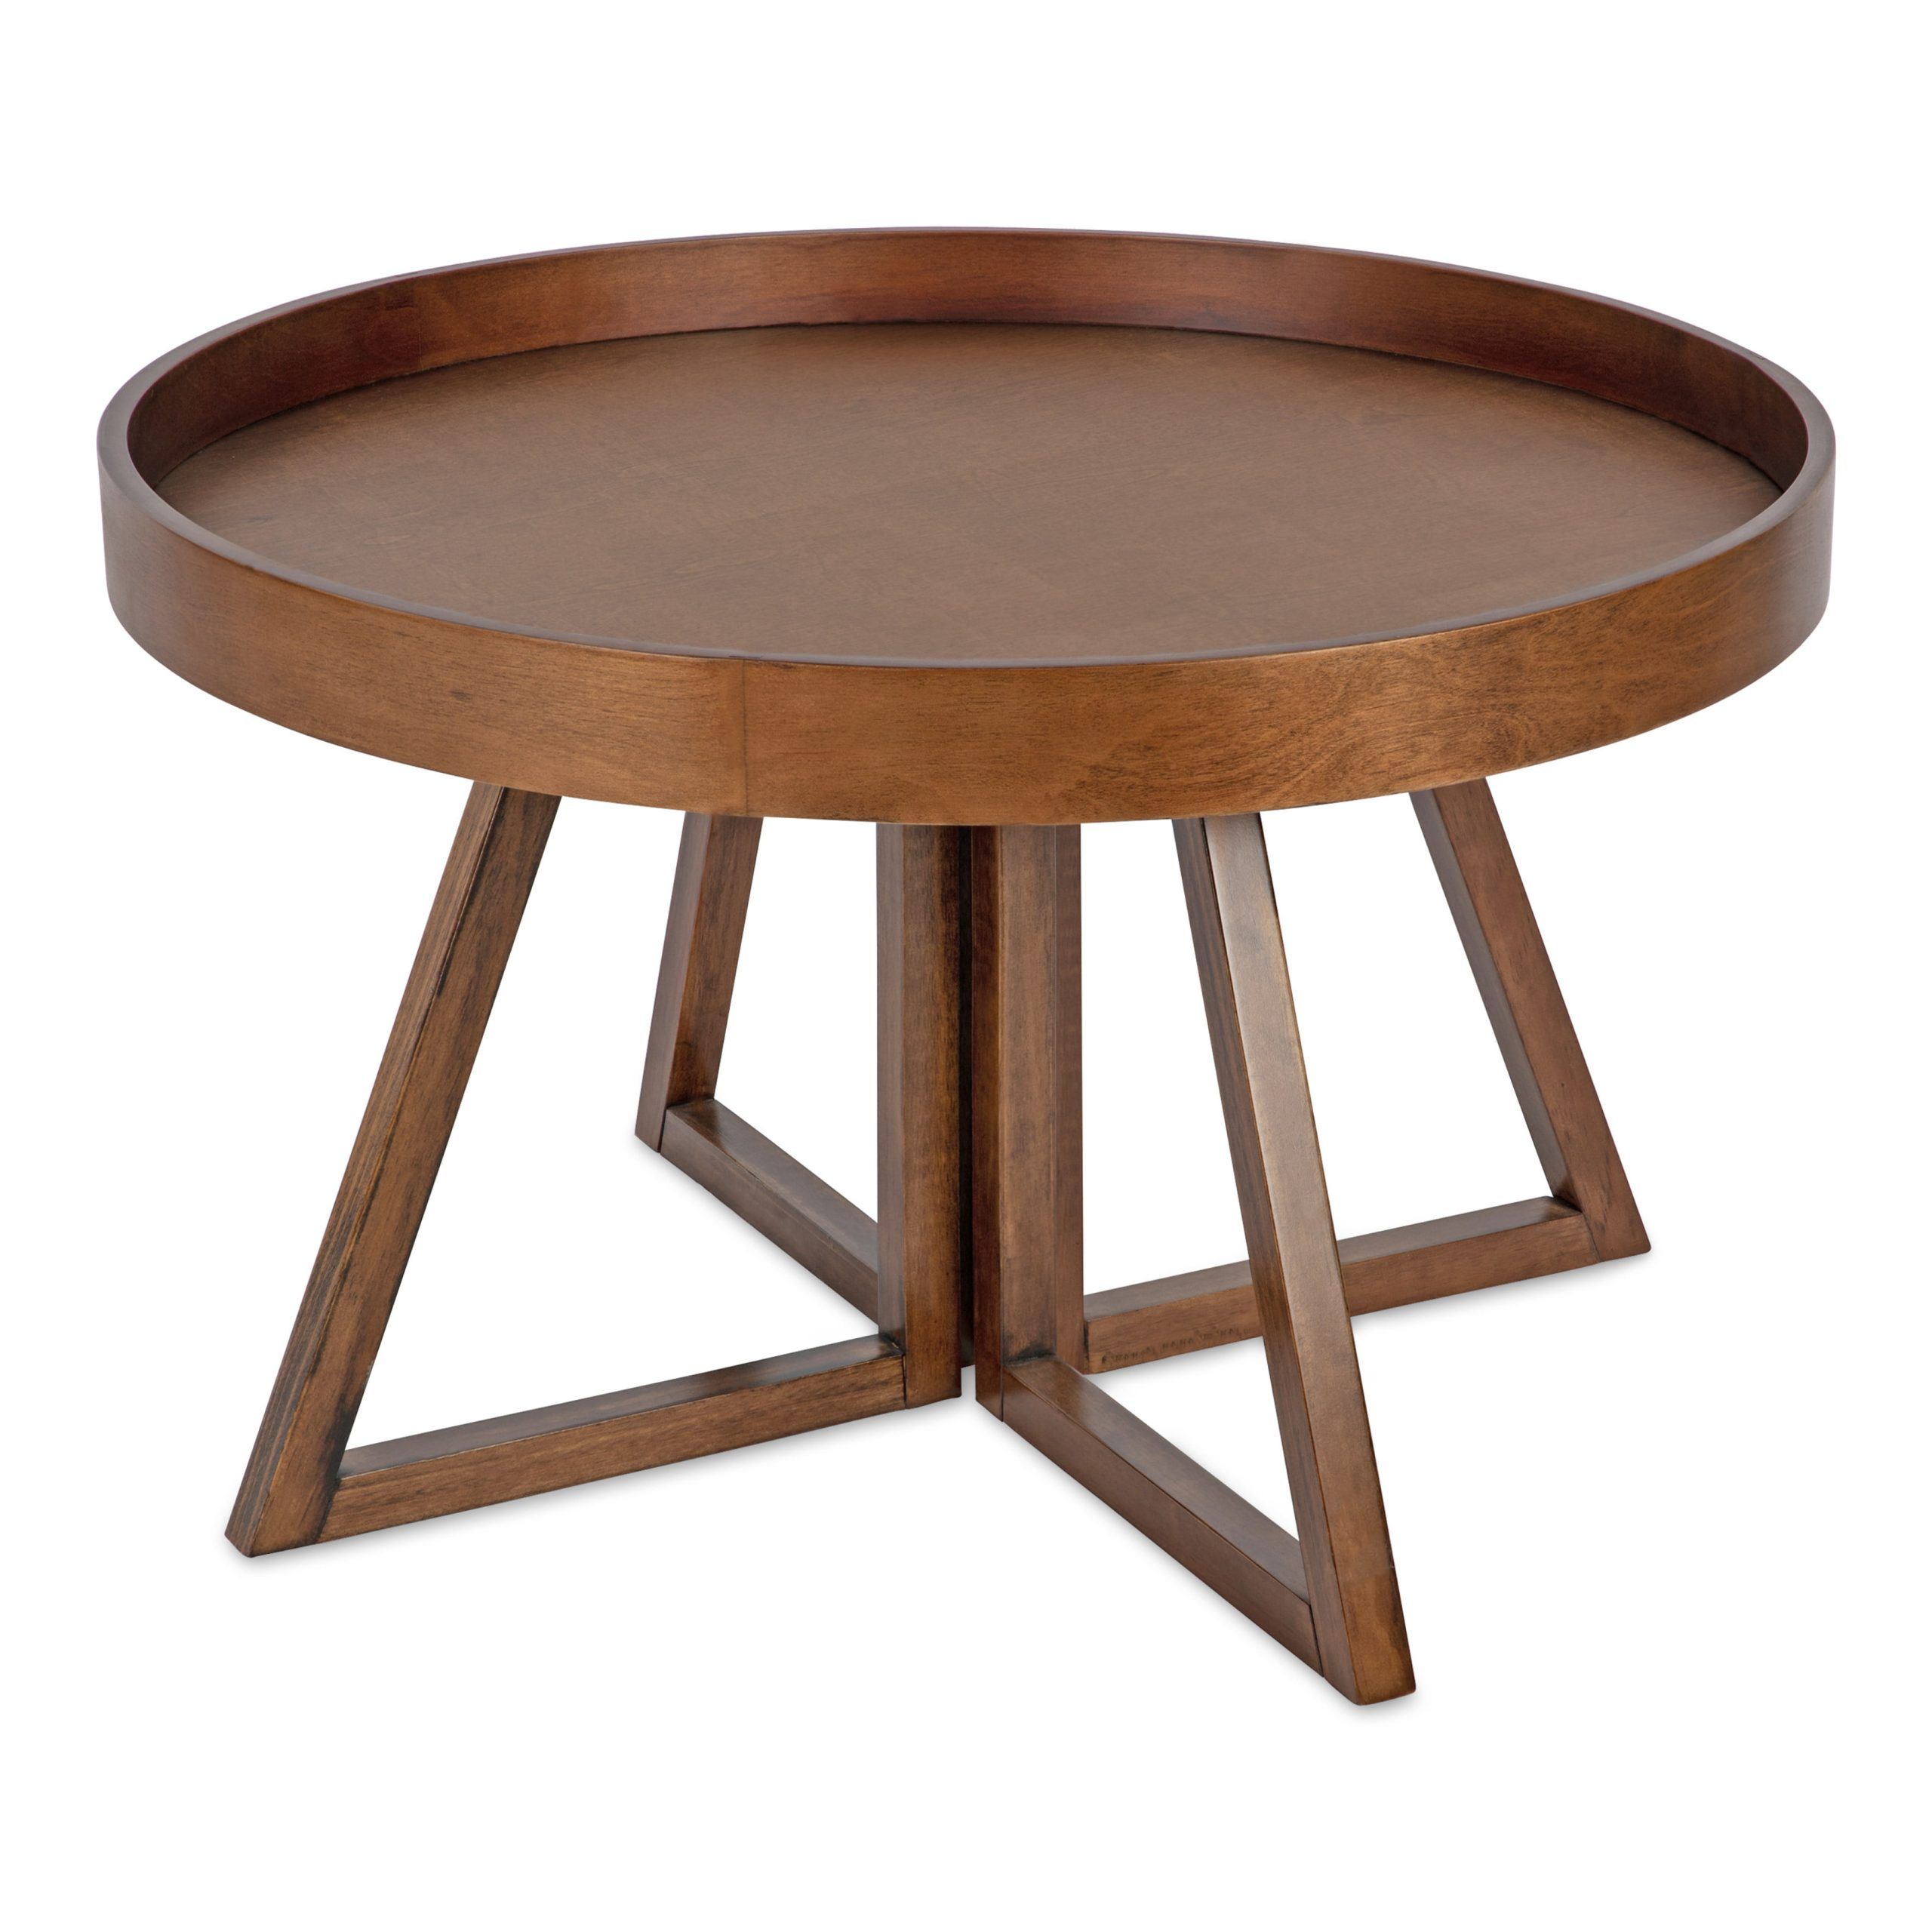 2020 Walnut Coffee Tables Regarding Kate And Laurel Avery Modern Round Coffee Table, 30" X 30" X  (View 6 of 15)